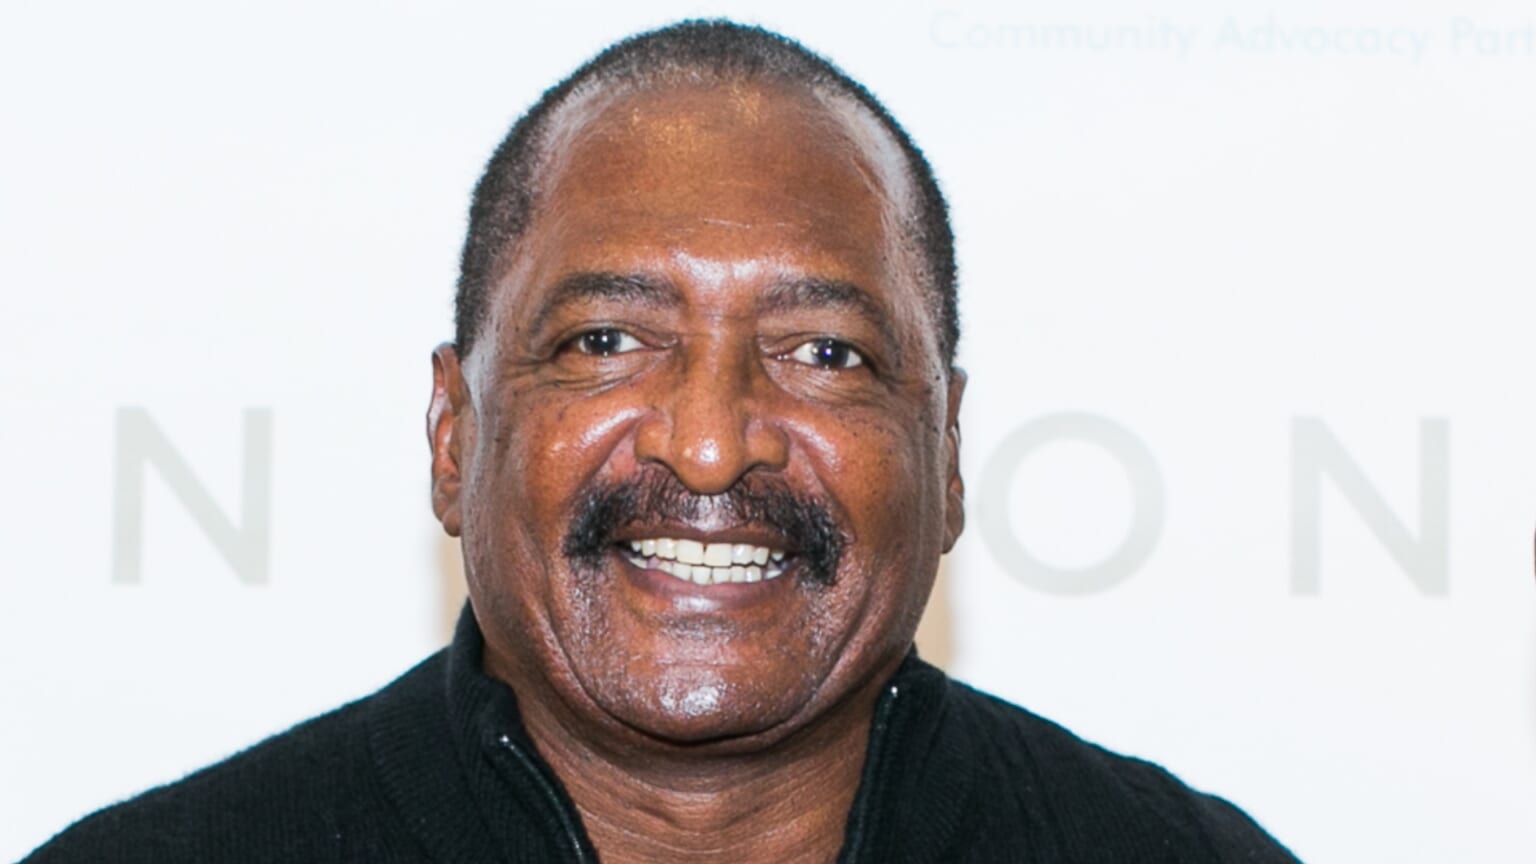 Mathew Knowles to retire from music industry: ‘I’m ready to move on’